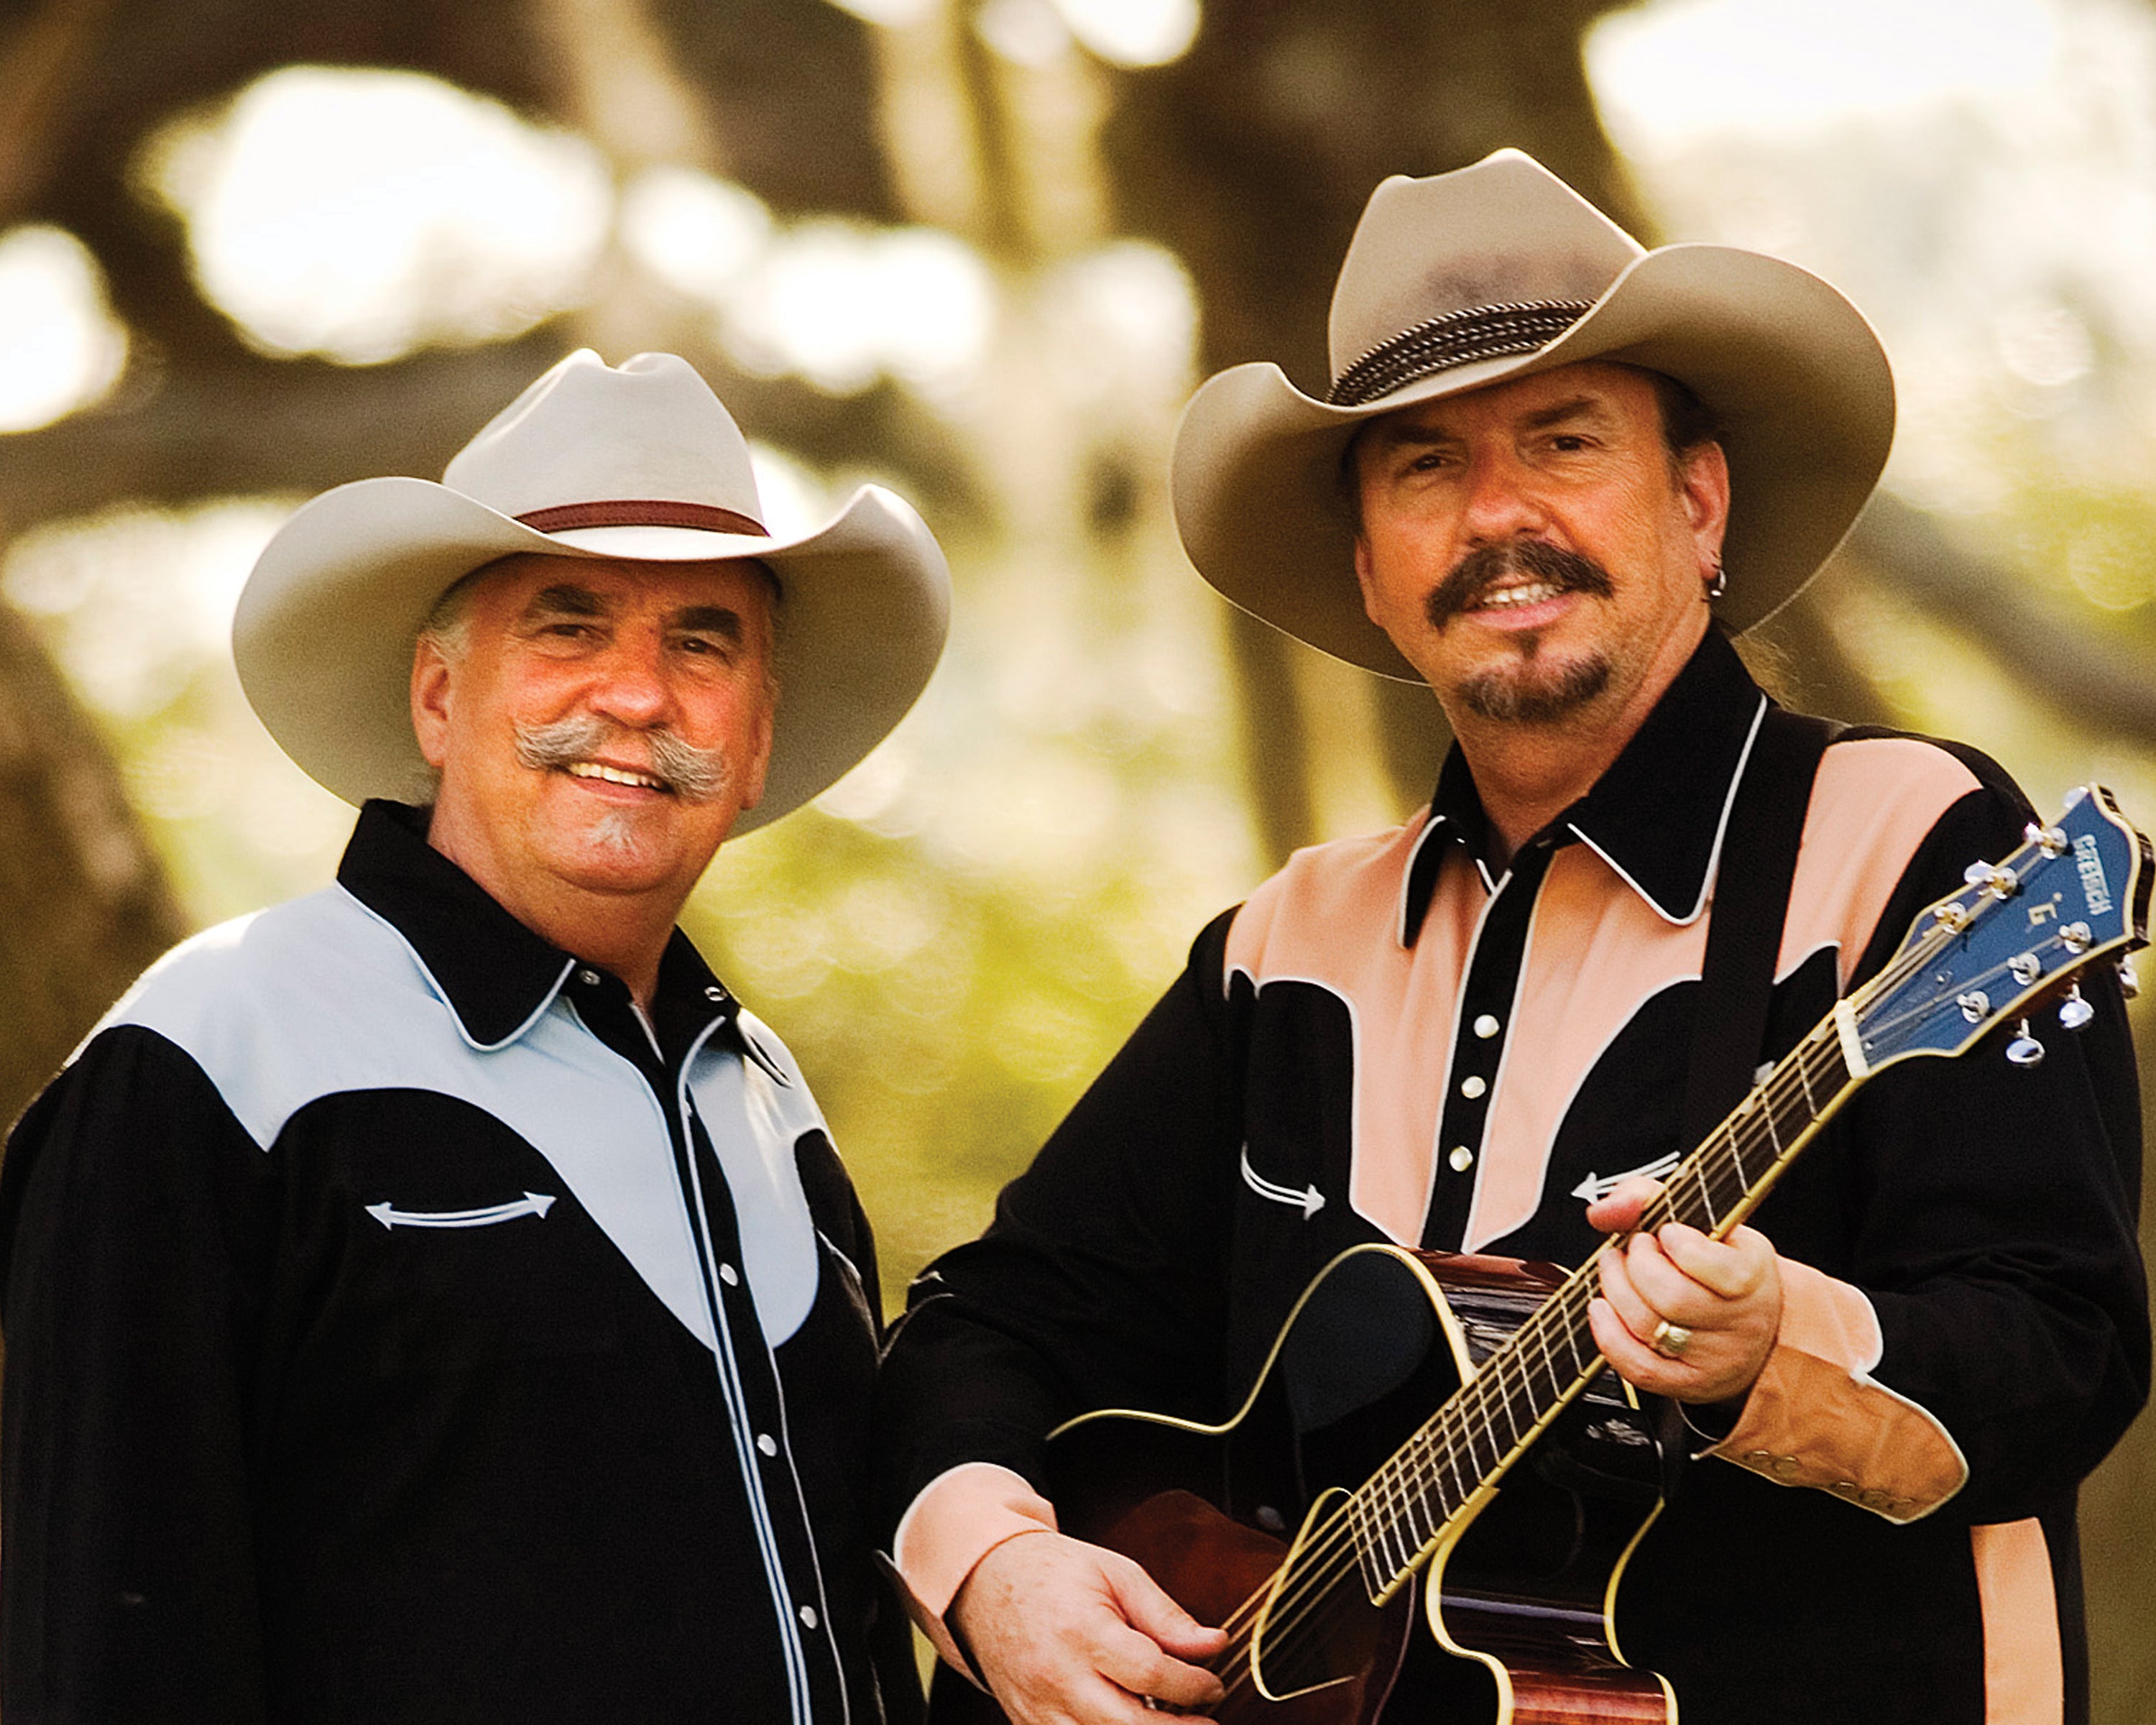 Bellamy Brothers at The Newberry